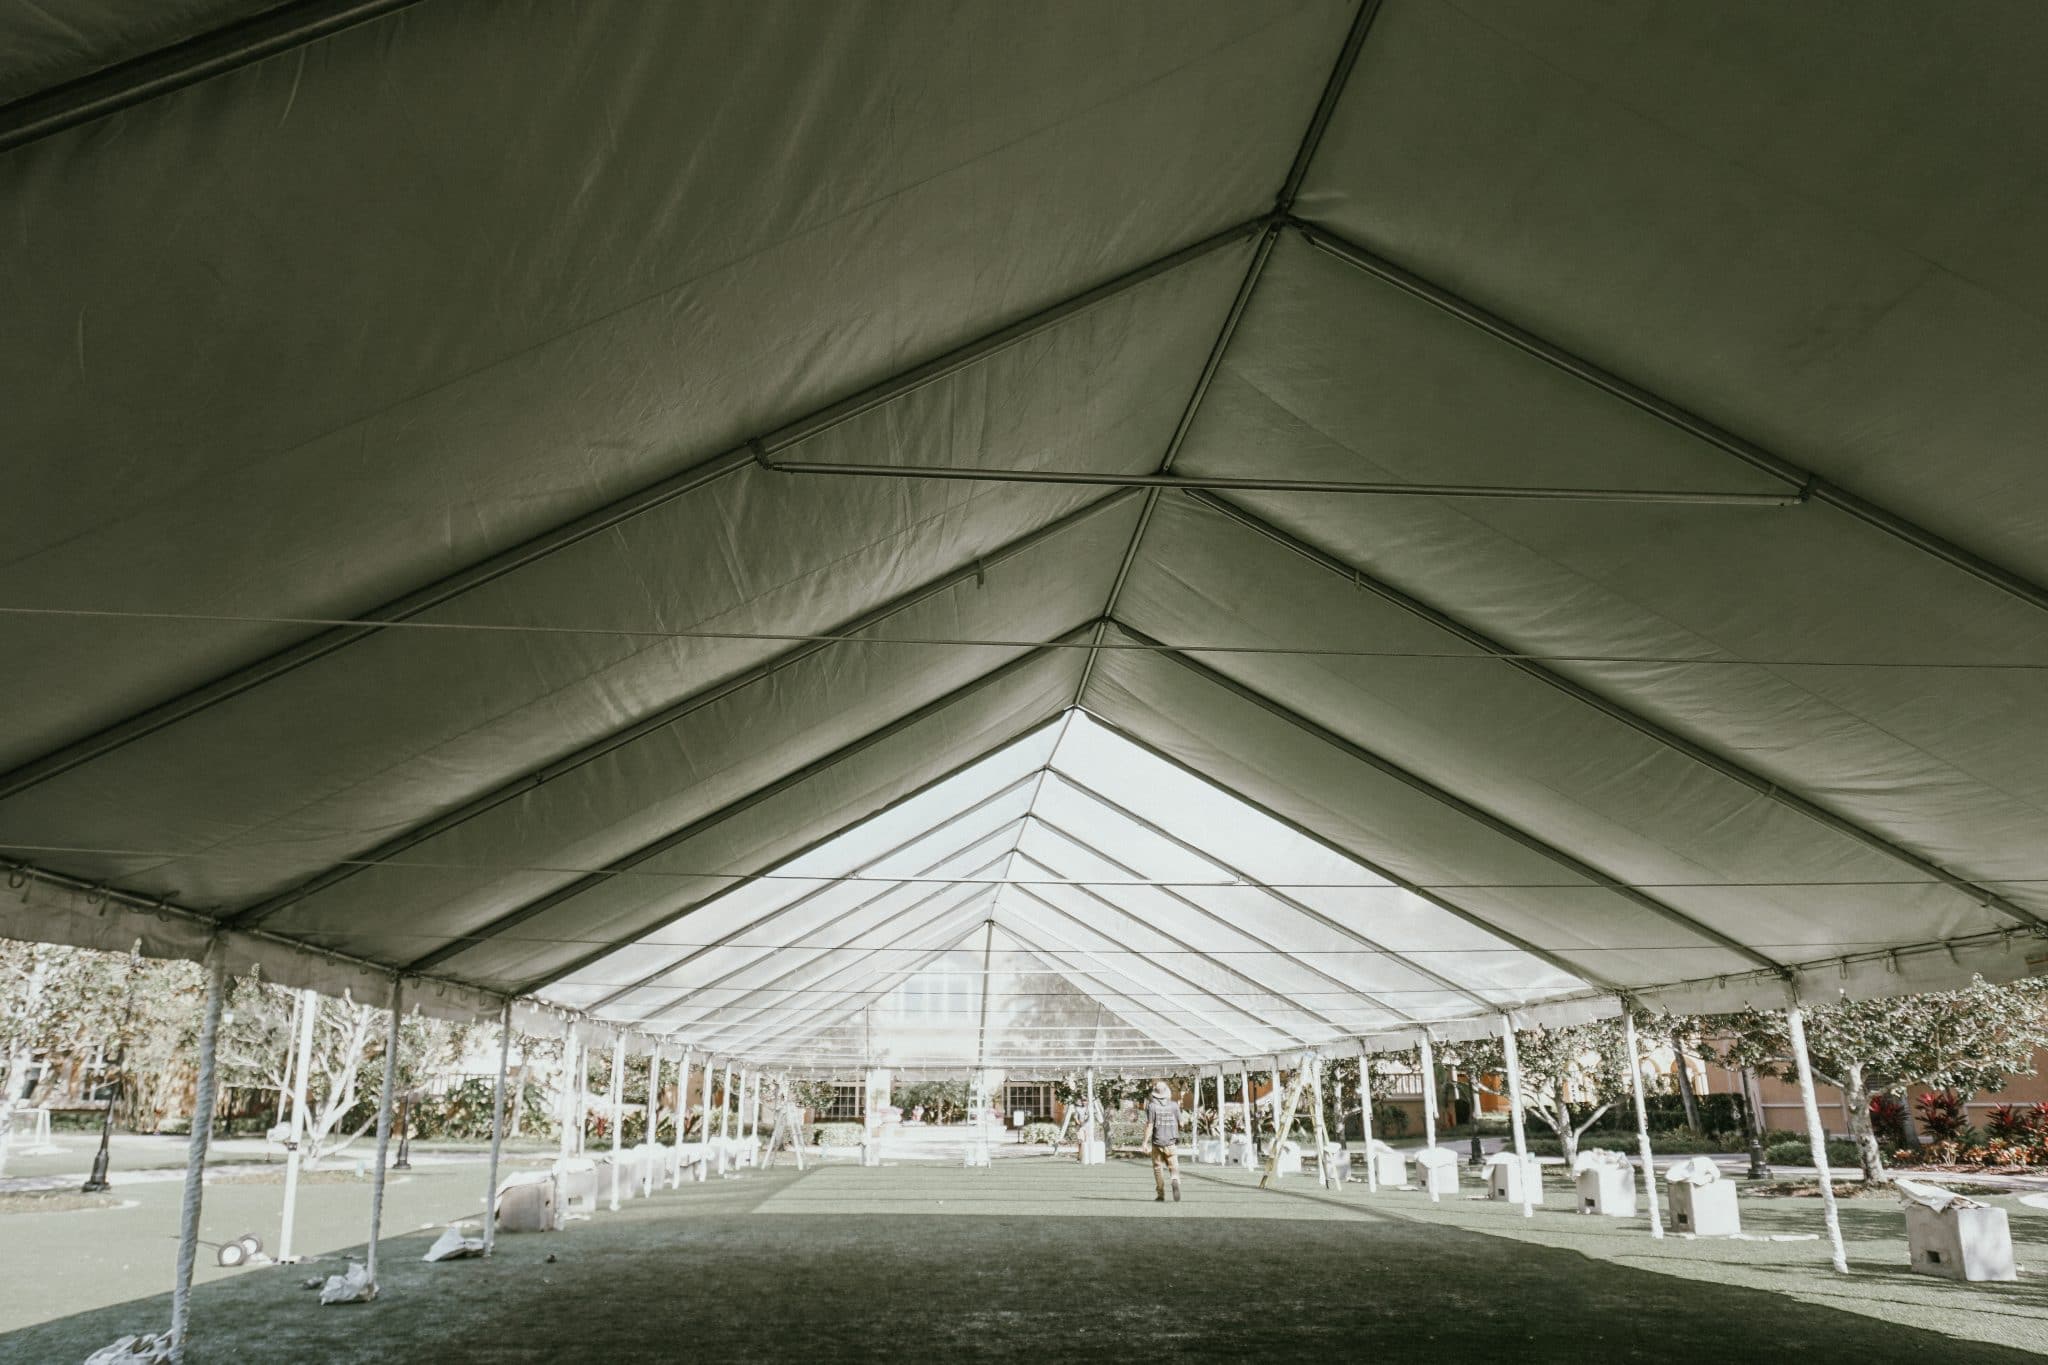 Orlando Wedding and Party Rentals- large white tent setup outside